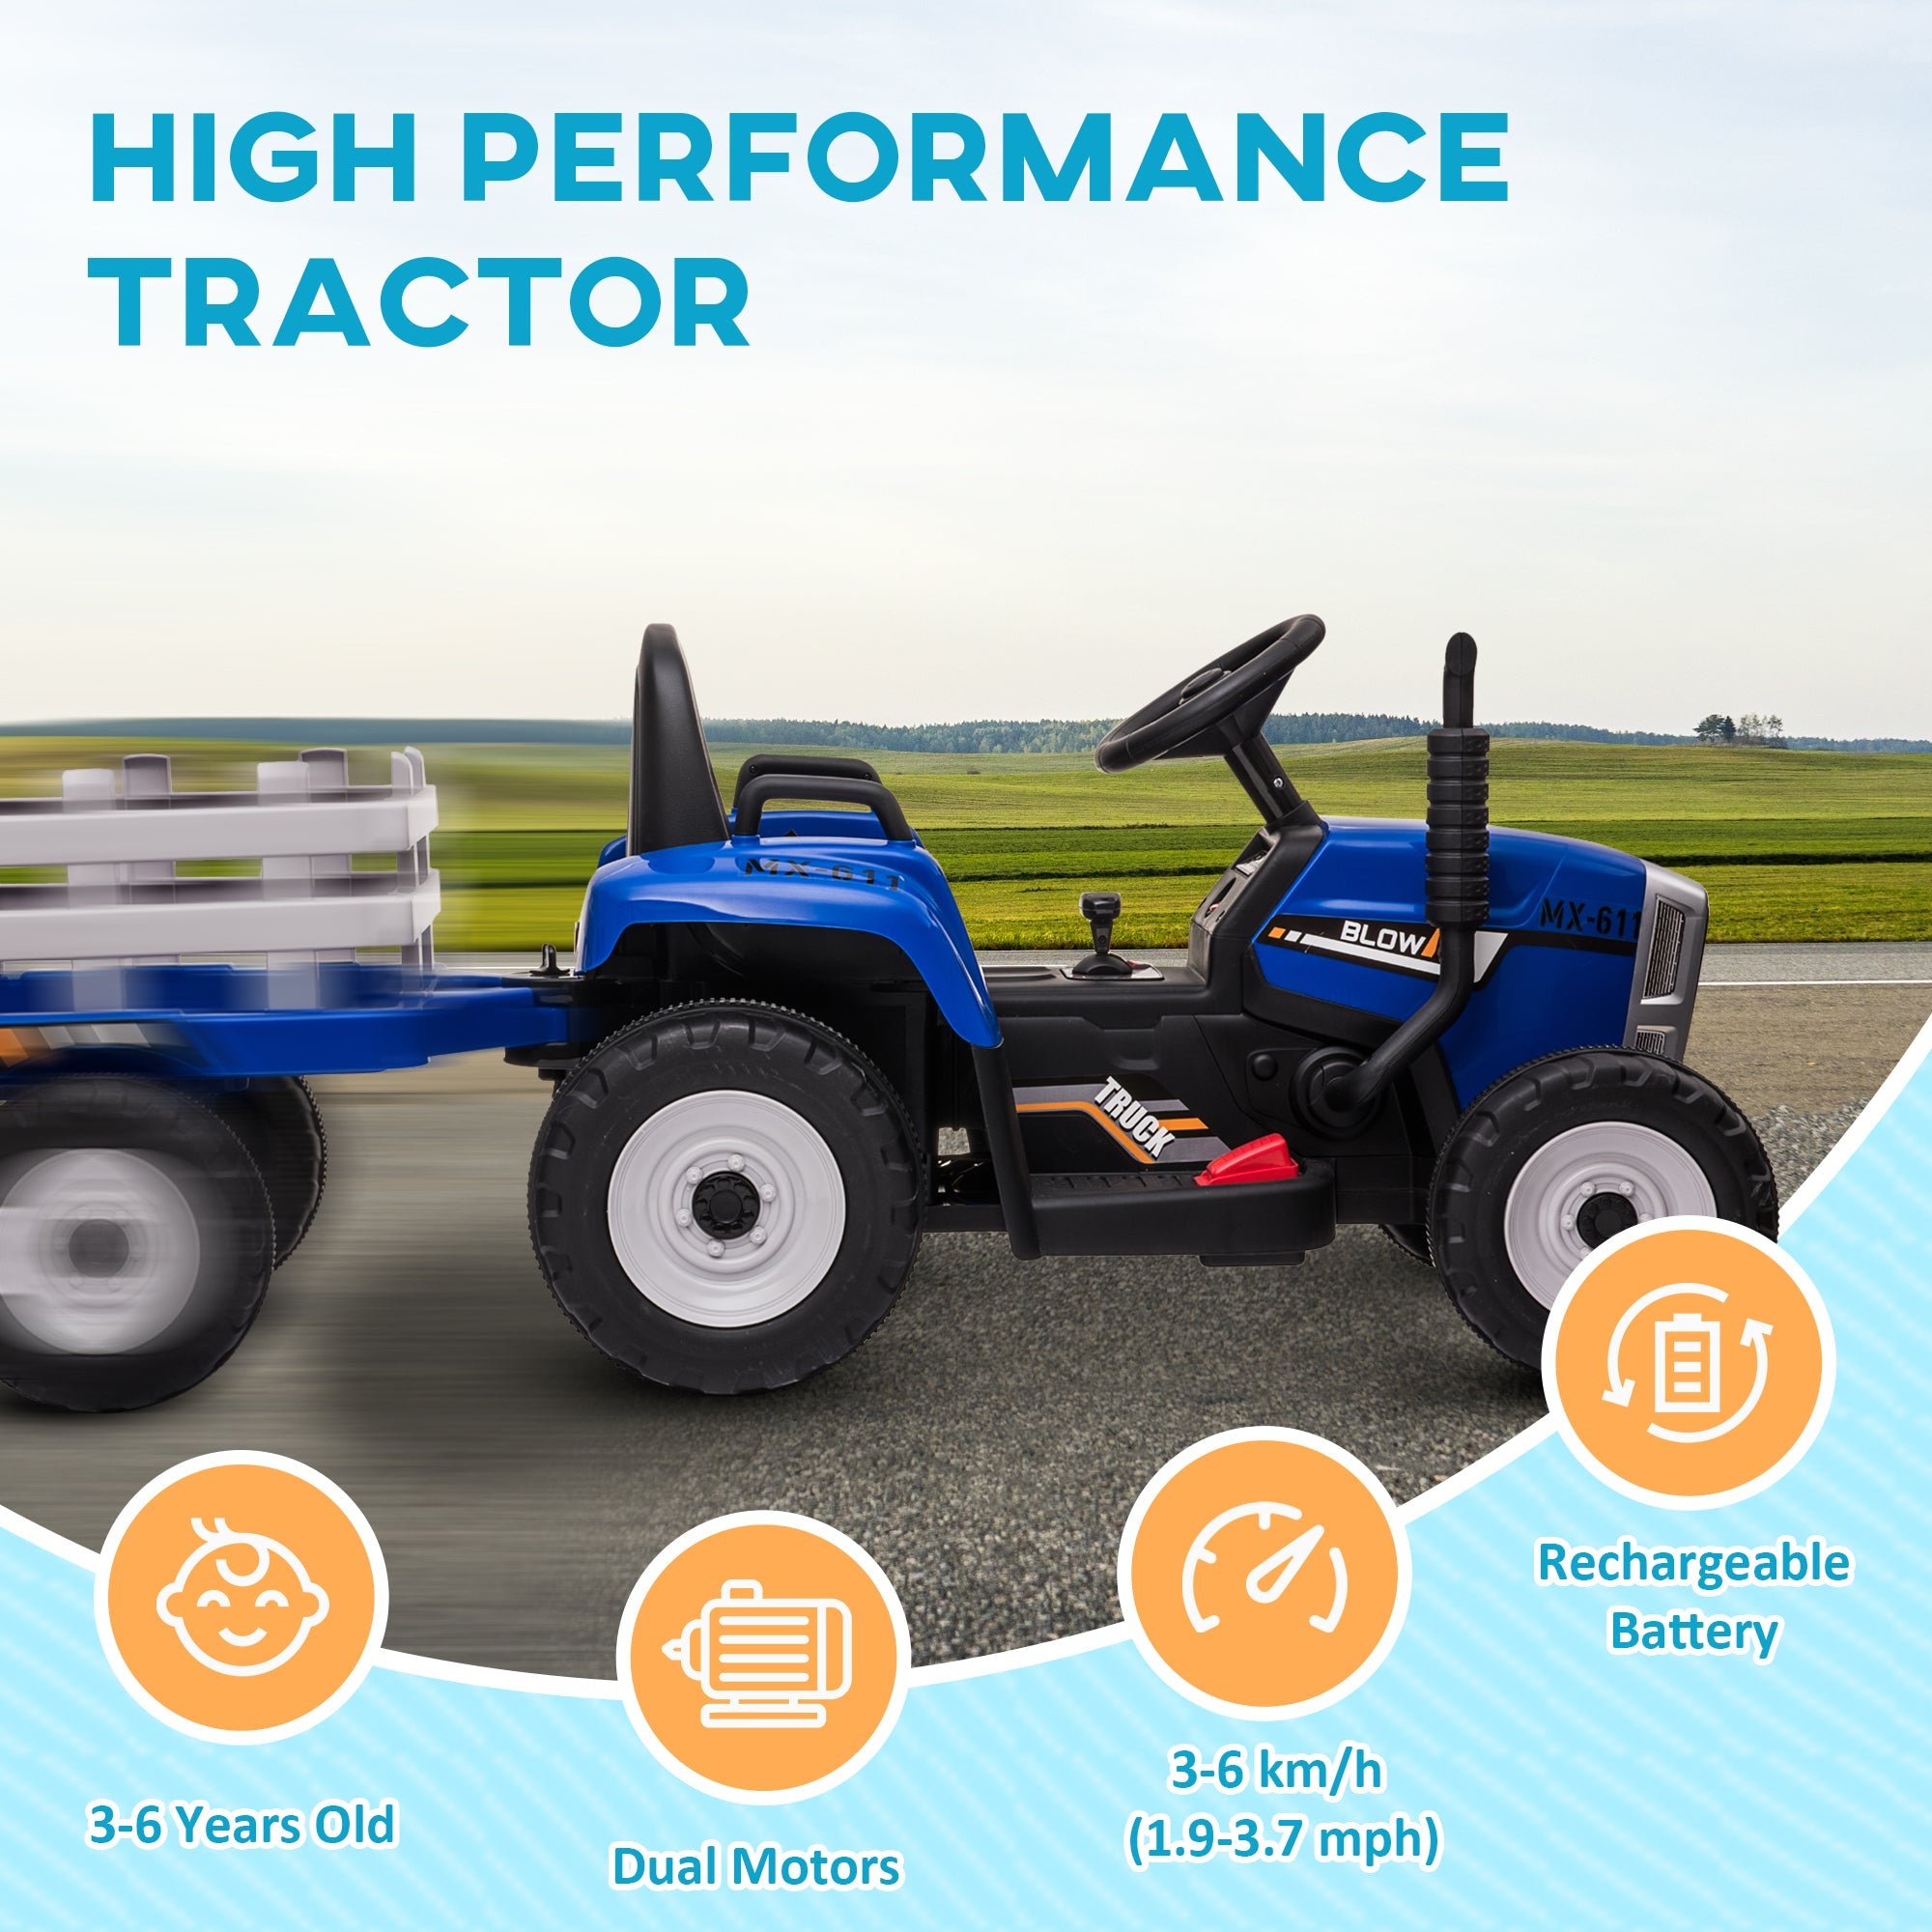 HOMCOM Electric Ride on Tractor w/ Detachable Trailer, 12V Kids Battery Powered Electric Car w/ Remote Control, Music Start up Sound, Blue - TovaHaus